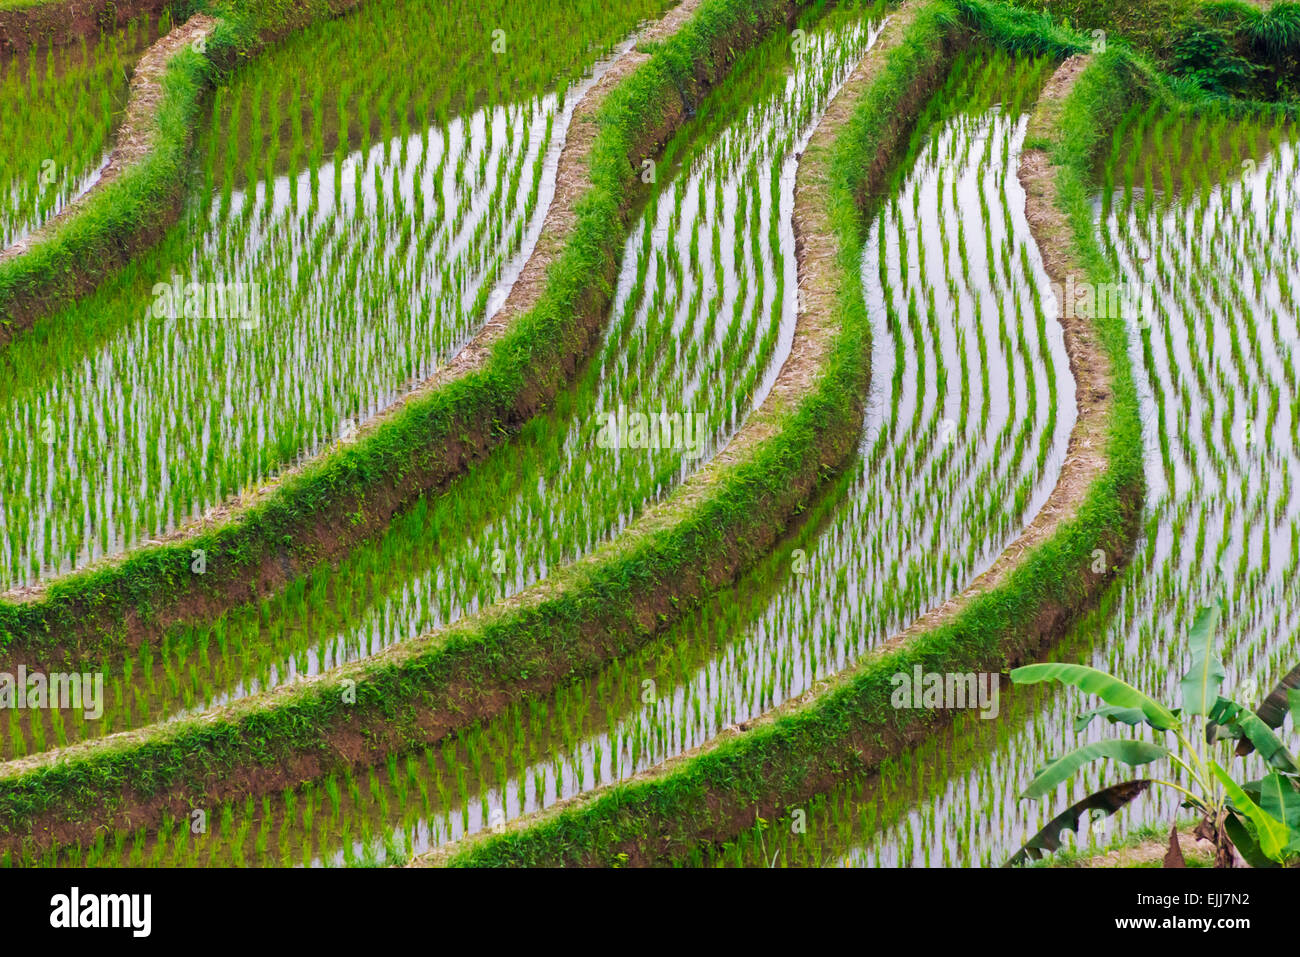 Water filled rice terraces, Bali island, Indonesia Stock Photo